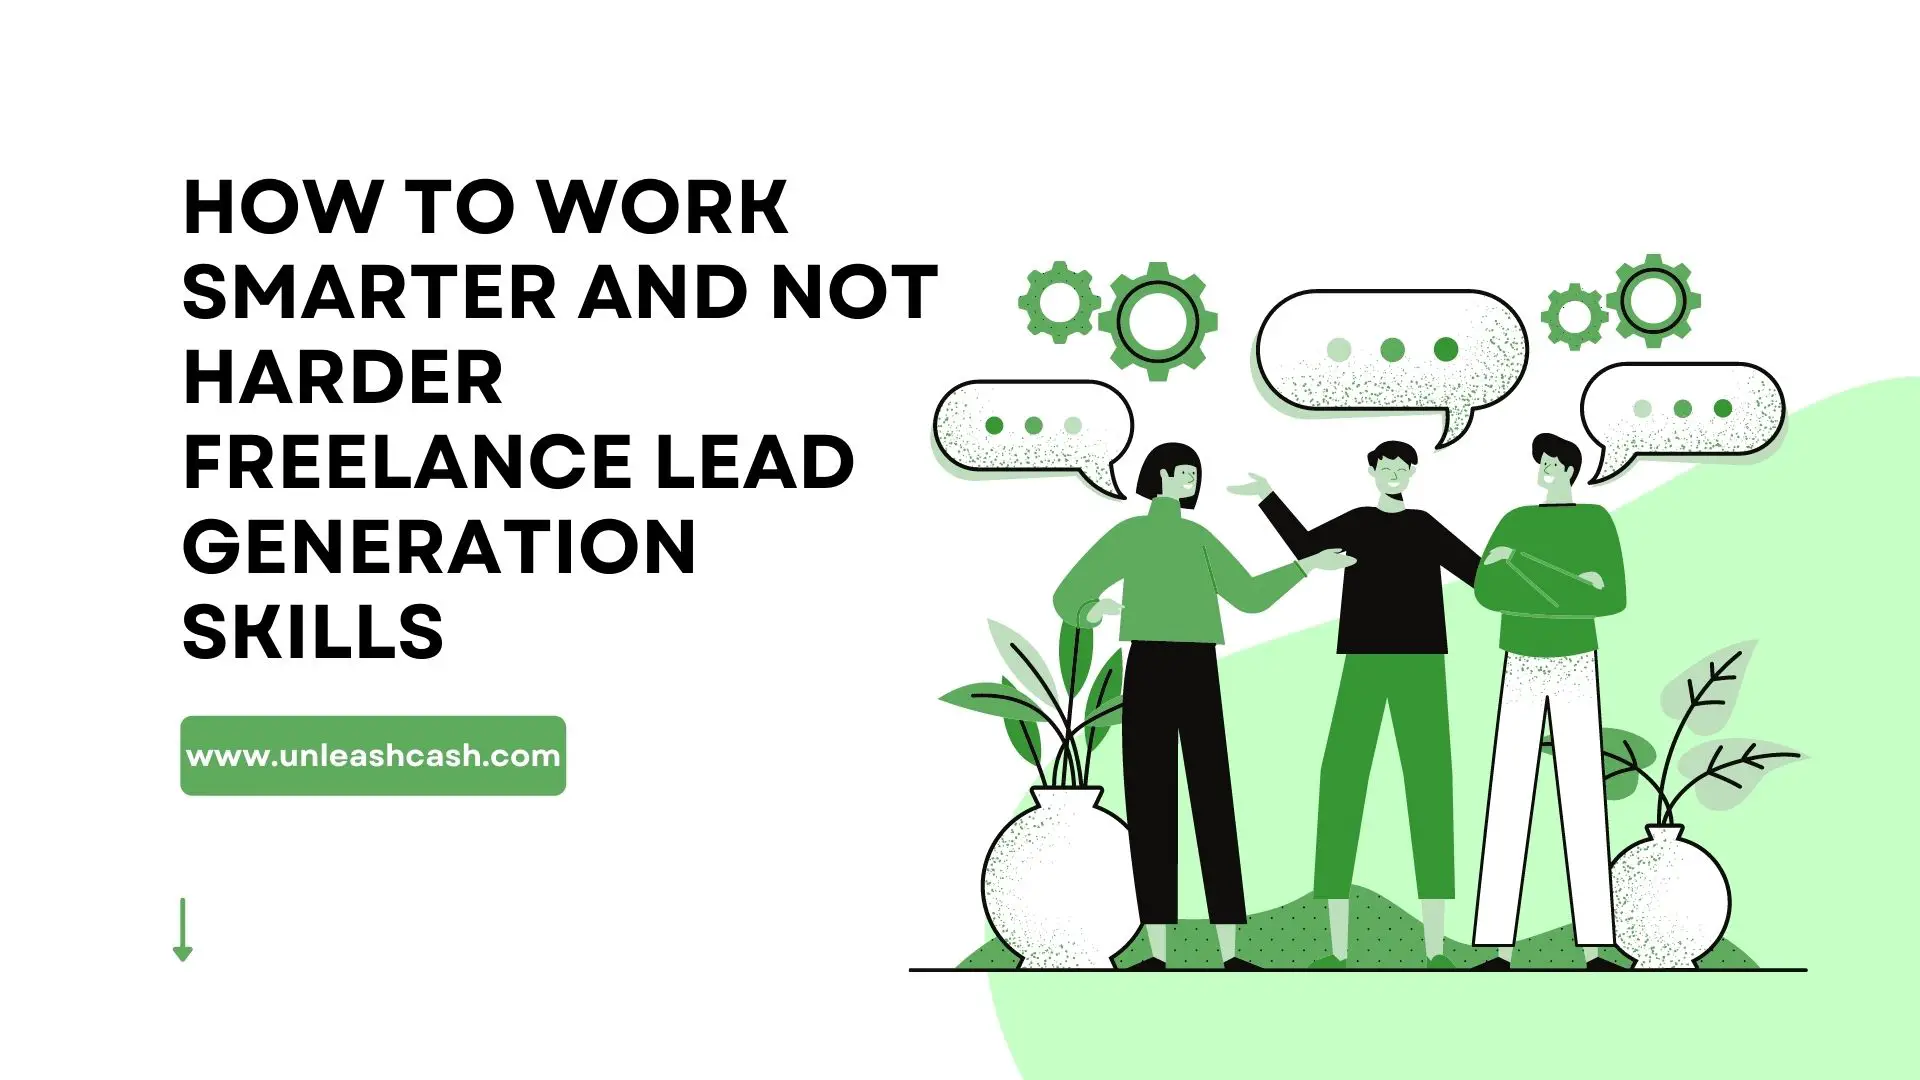 How To Work Smarter And Not Harder Freelance Lead Generation Skills